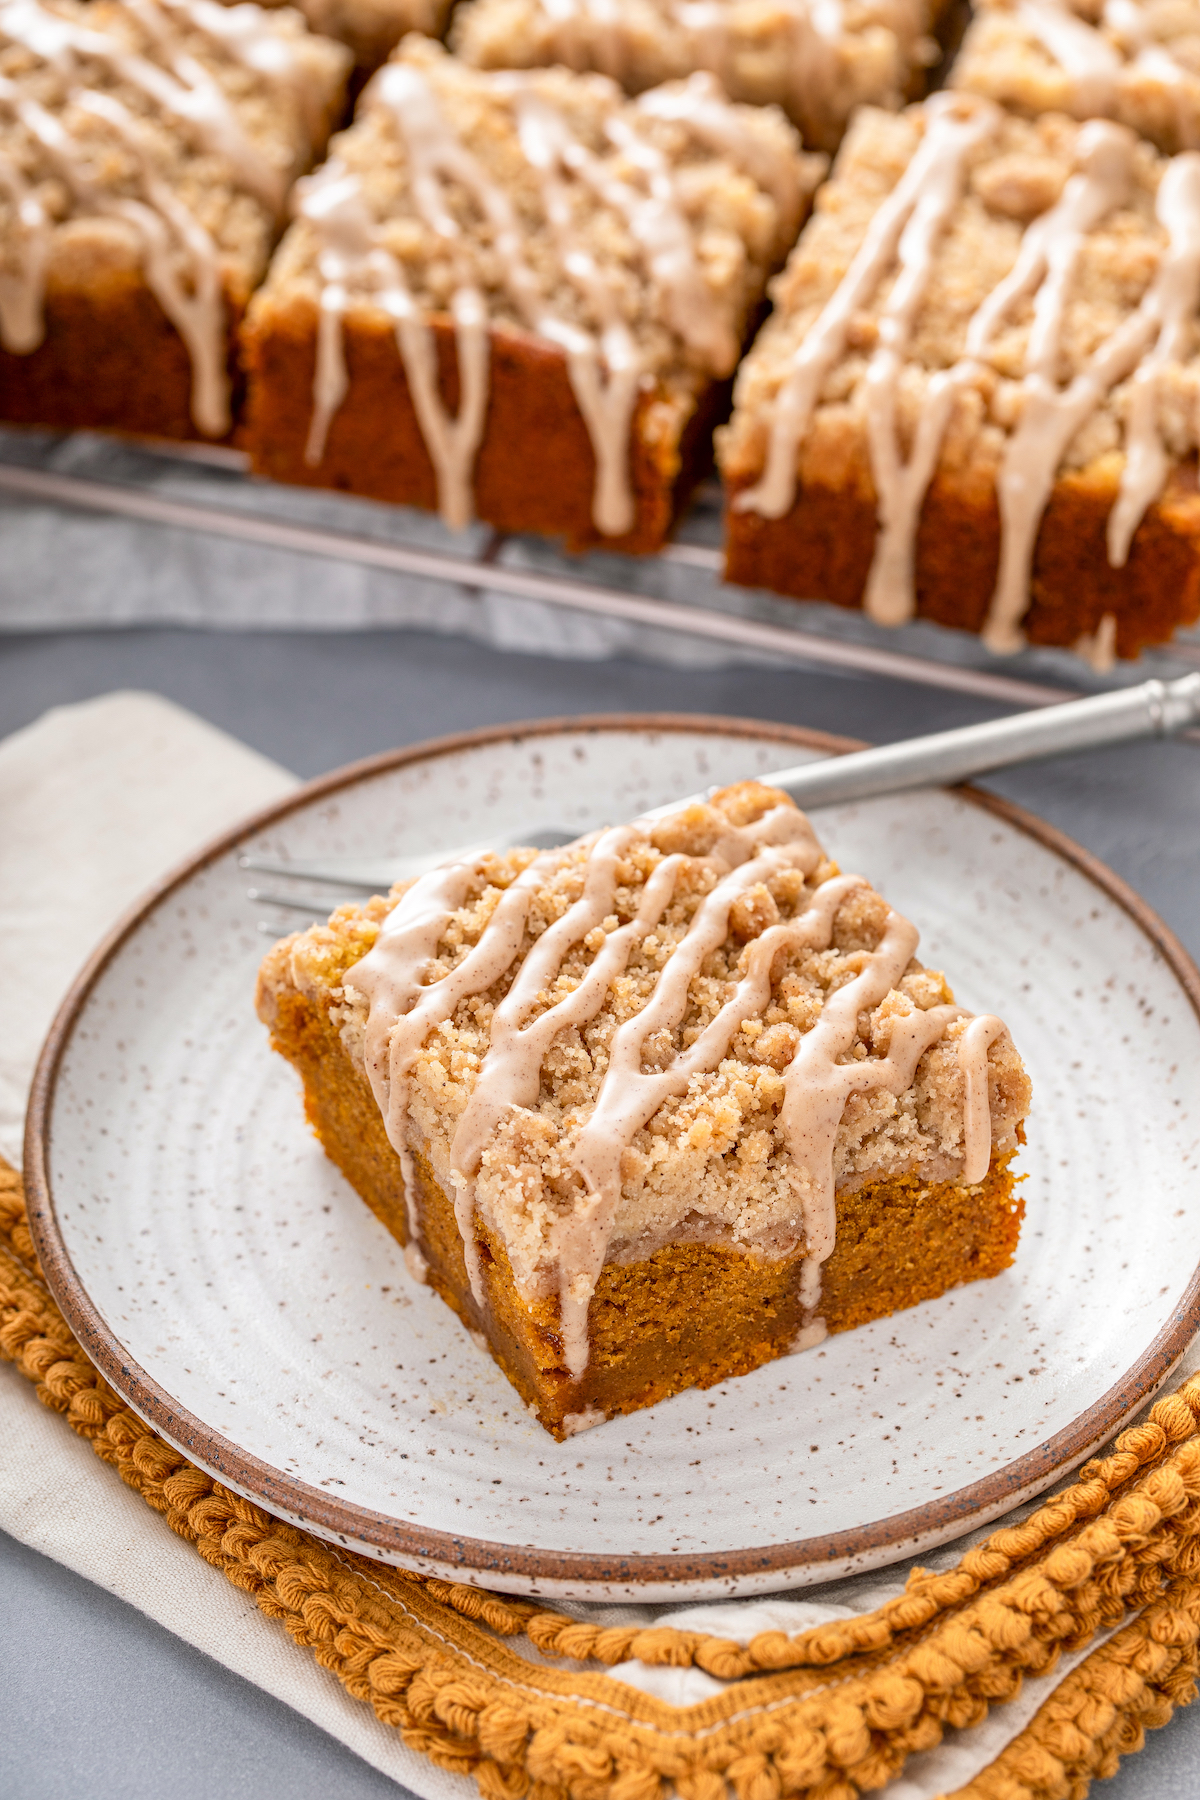 A serving of coffee cake on a plate, with more squares in the background.